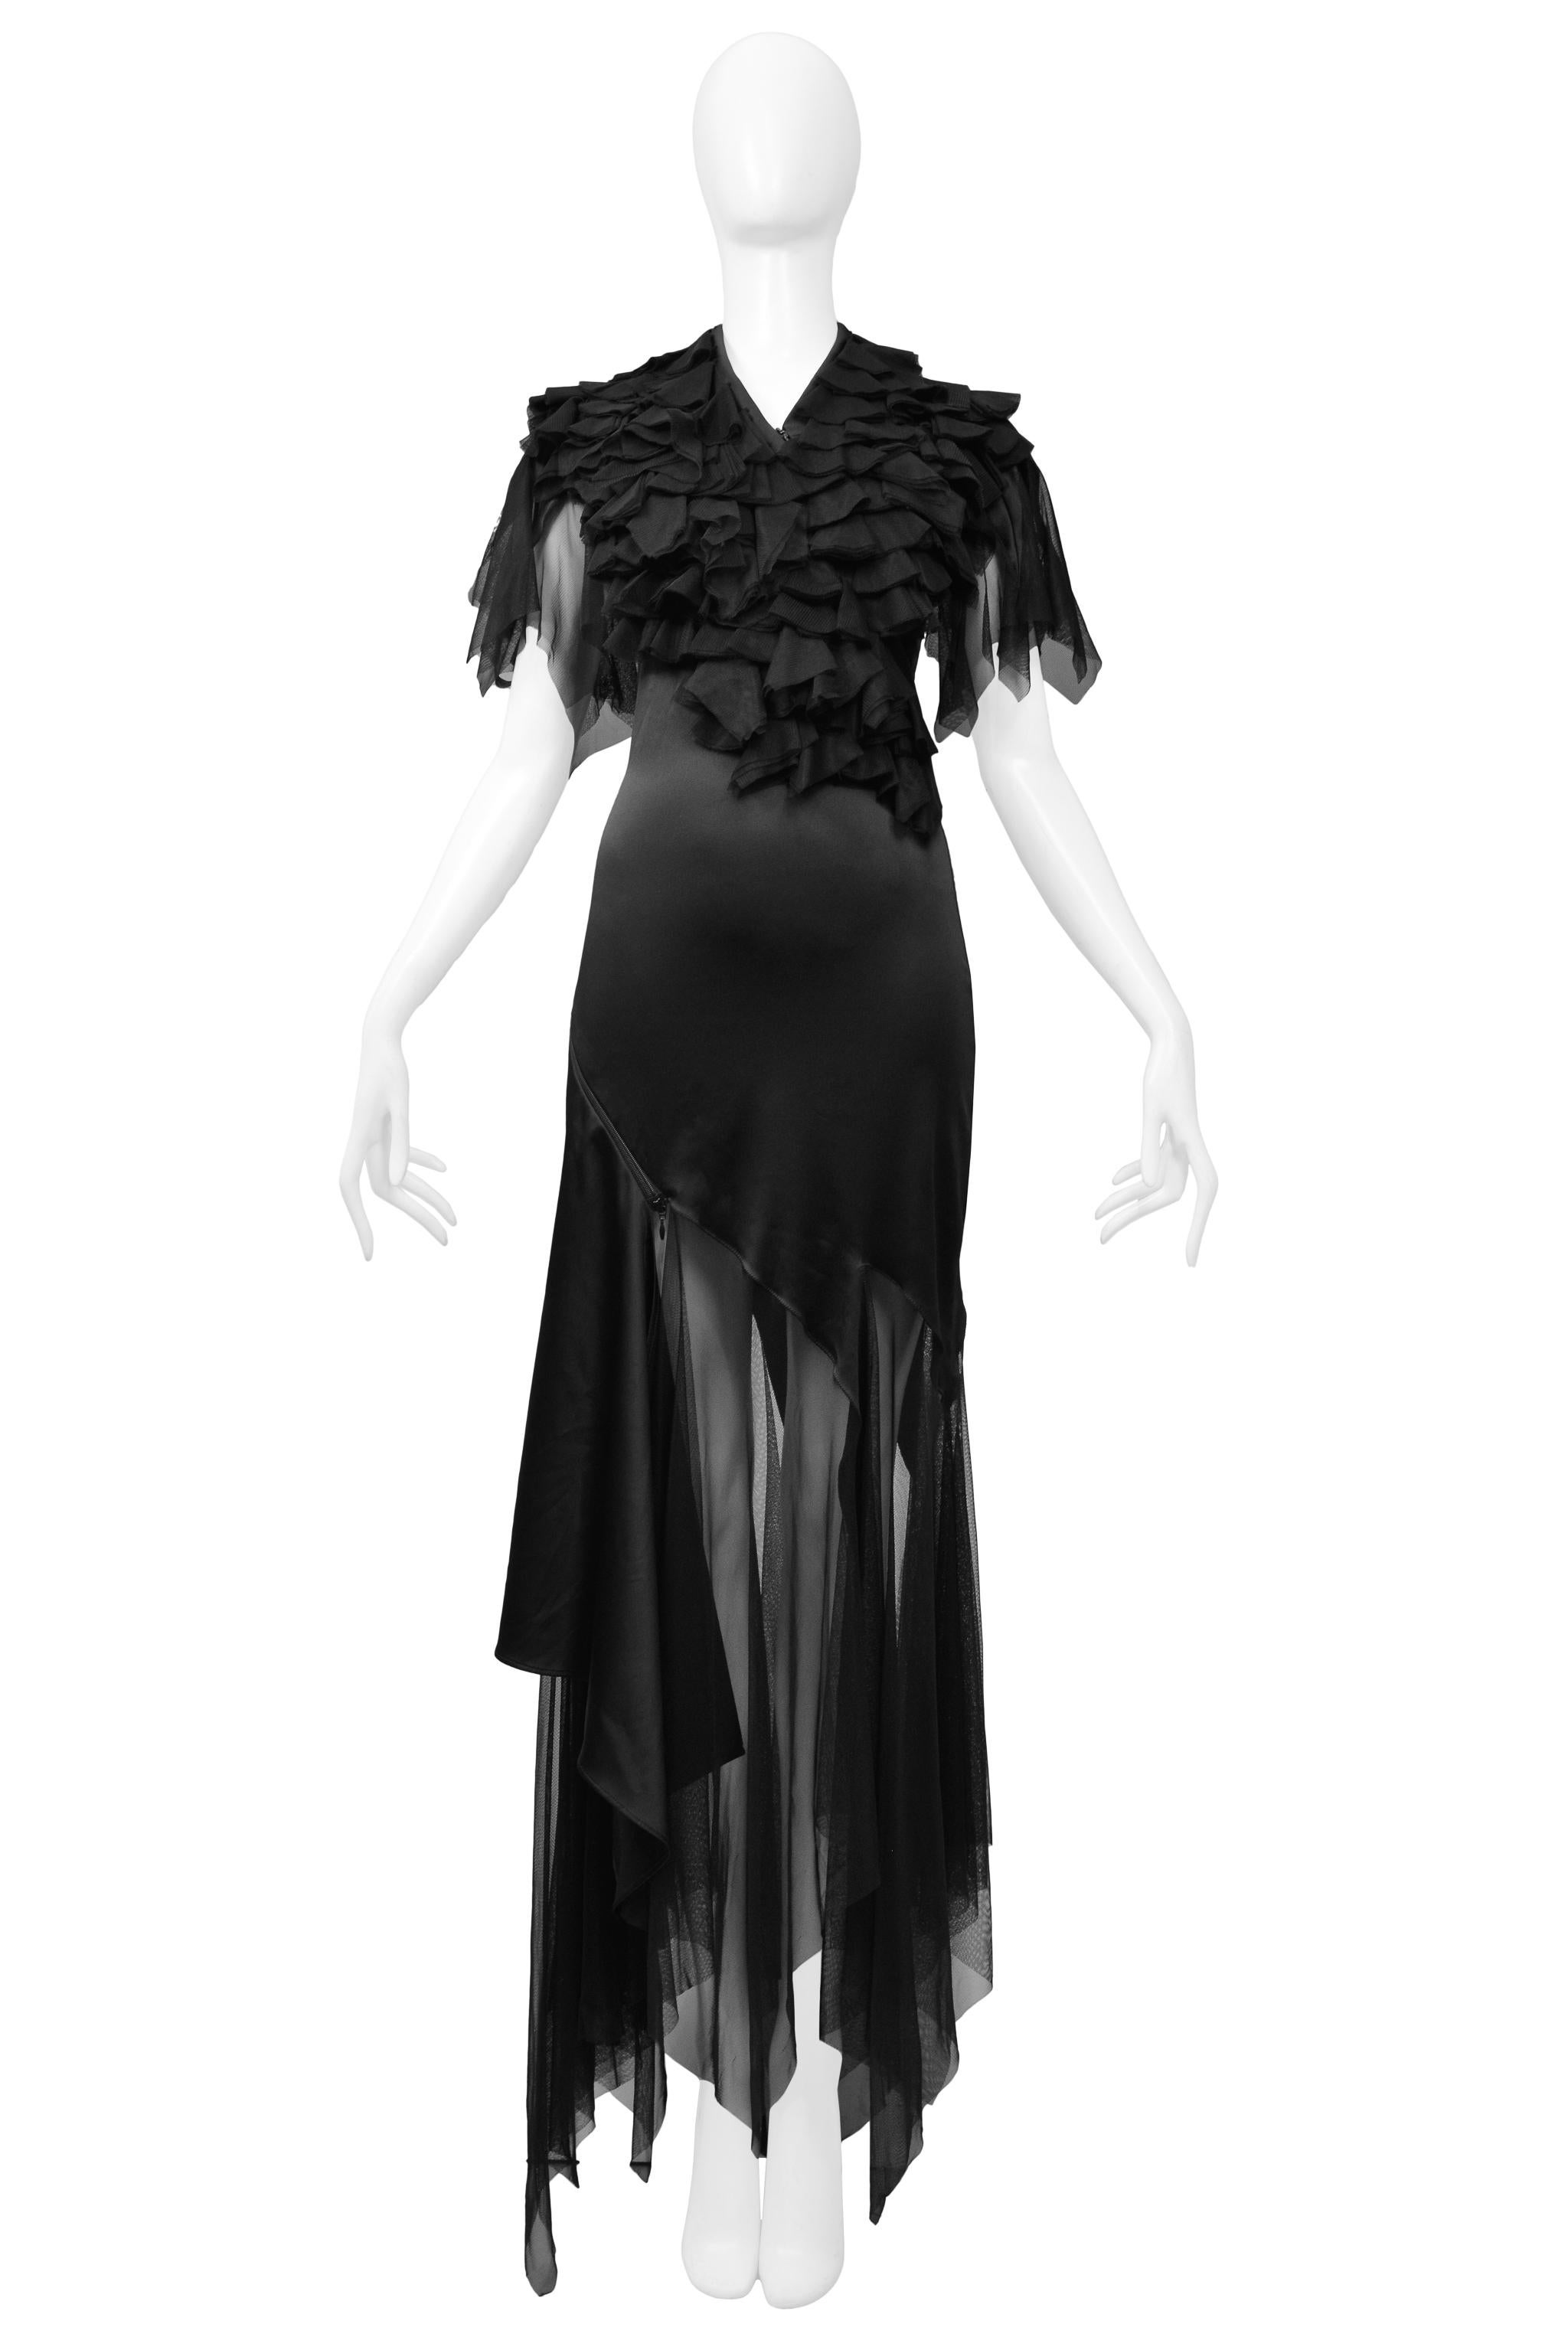 Resurrection Vintage is excited to offer an Alexander McQueen black stretch satin gown featuring a spiral zipper from the neckline to the hem, a ruffle tulle top and flutter sleeves, and asymmetrical handkerchief tulle hem. Look number 42 from the